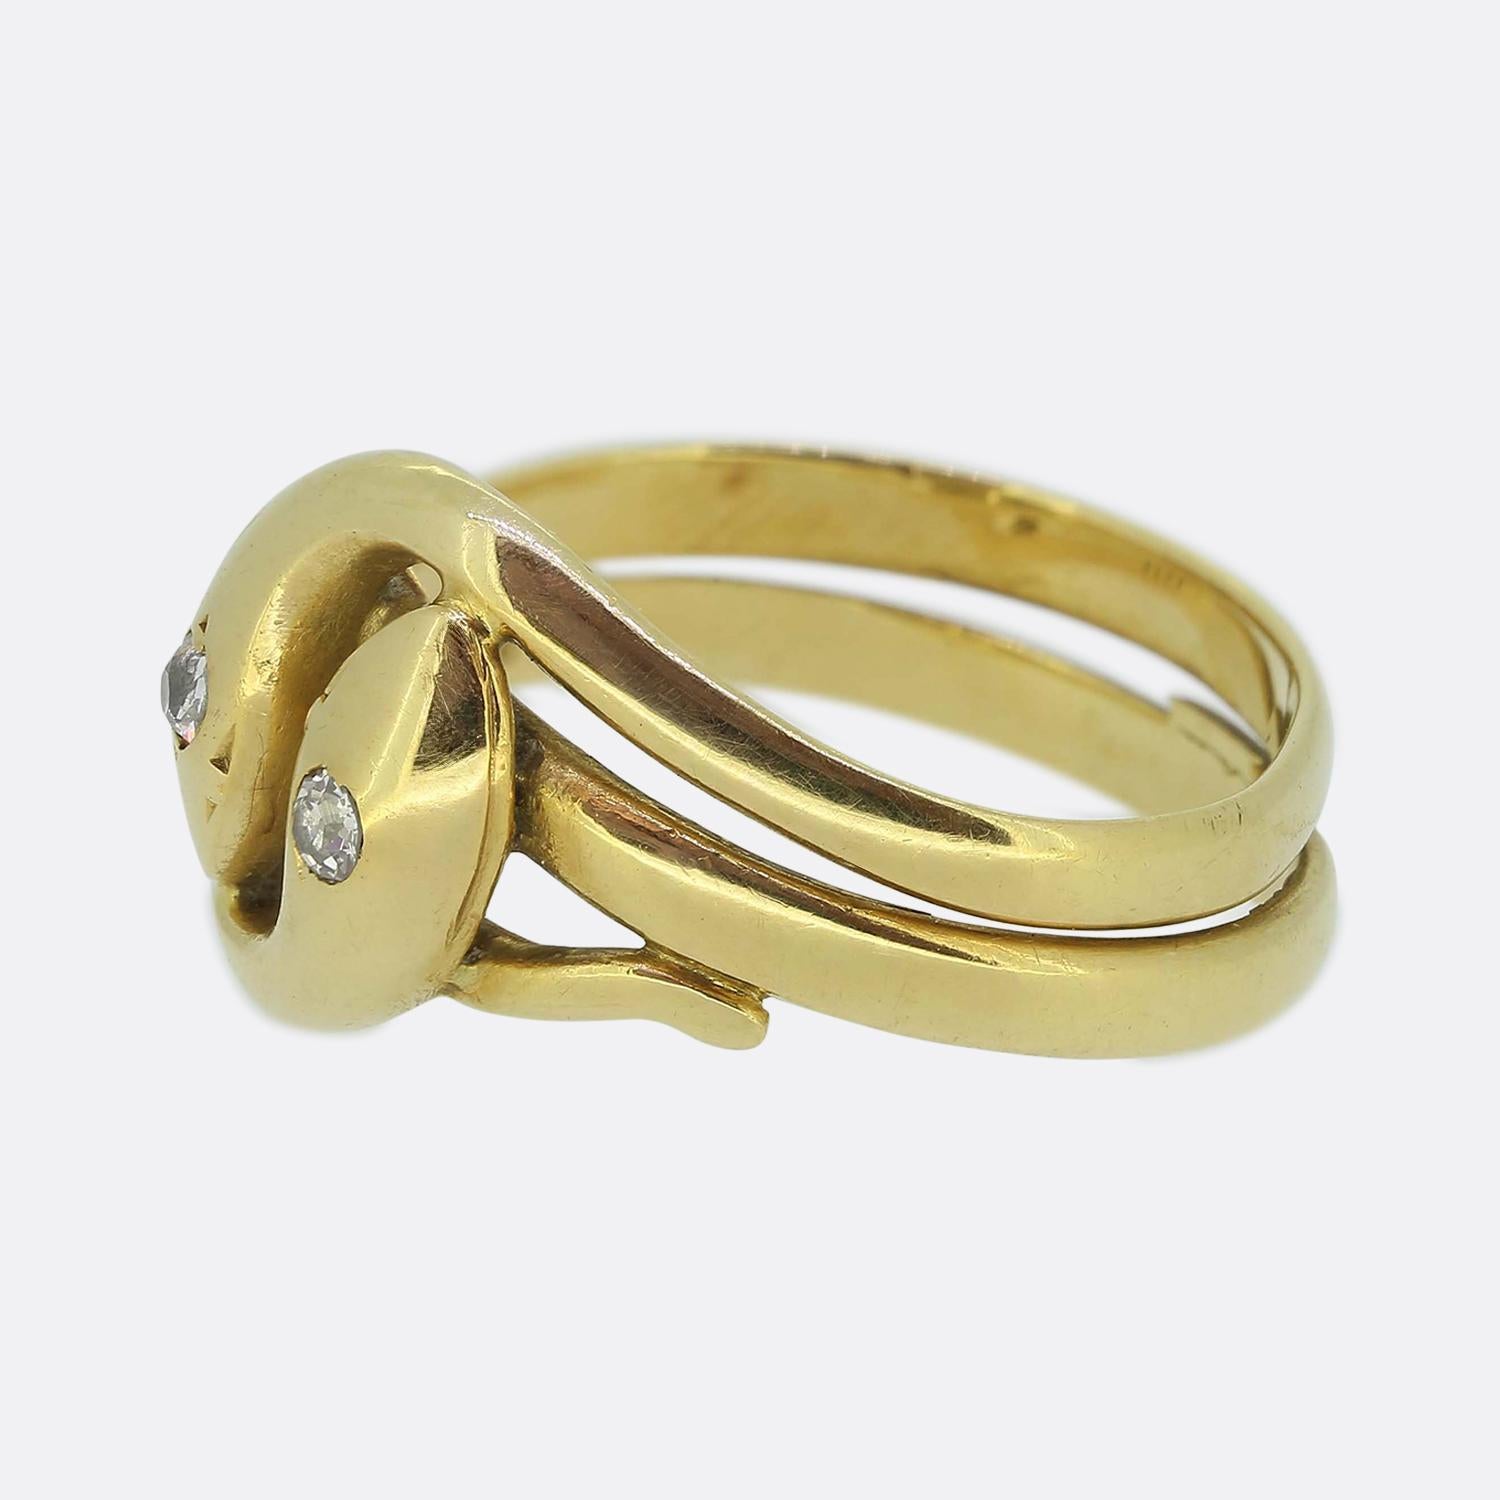 Here we have an 18ct yellow gold ring handcrafted with meticulous attention to detail portraying two entwined snakes; each of which is adorned with a dazzling white old European cut diamond at its head. The shank elegantly forms the sinuous bodies